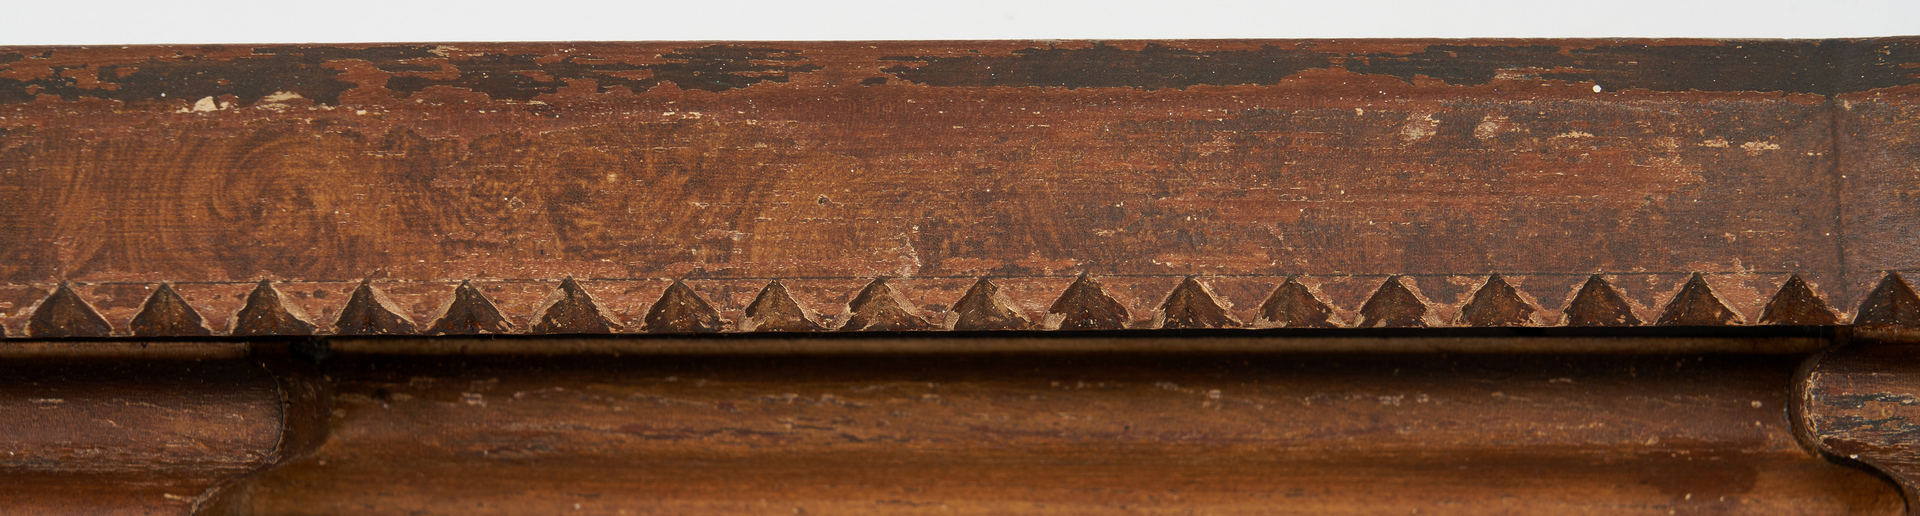 Lot 432: Southern Chip Carved Paint Decorated Mantel